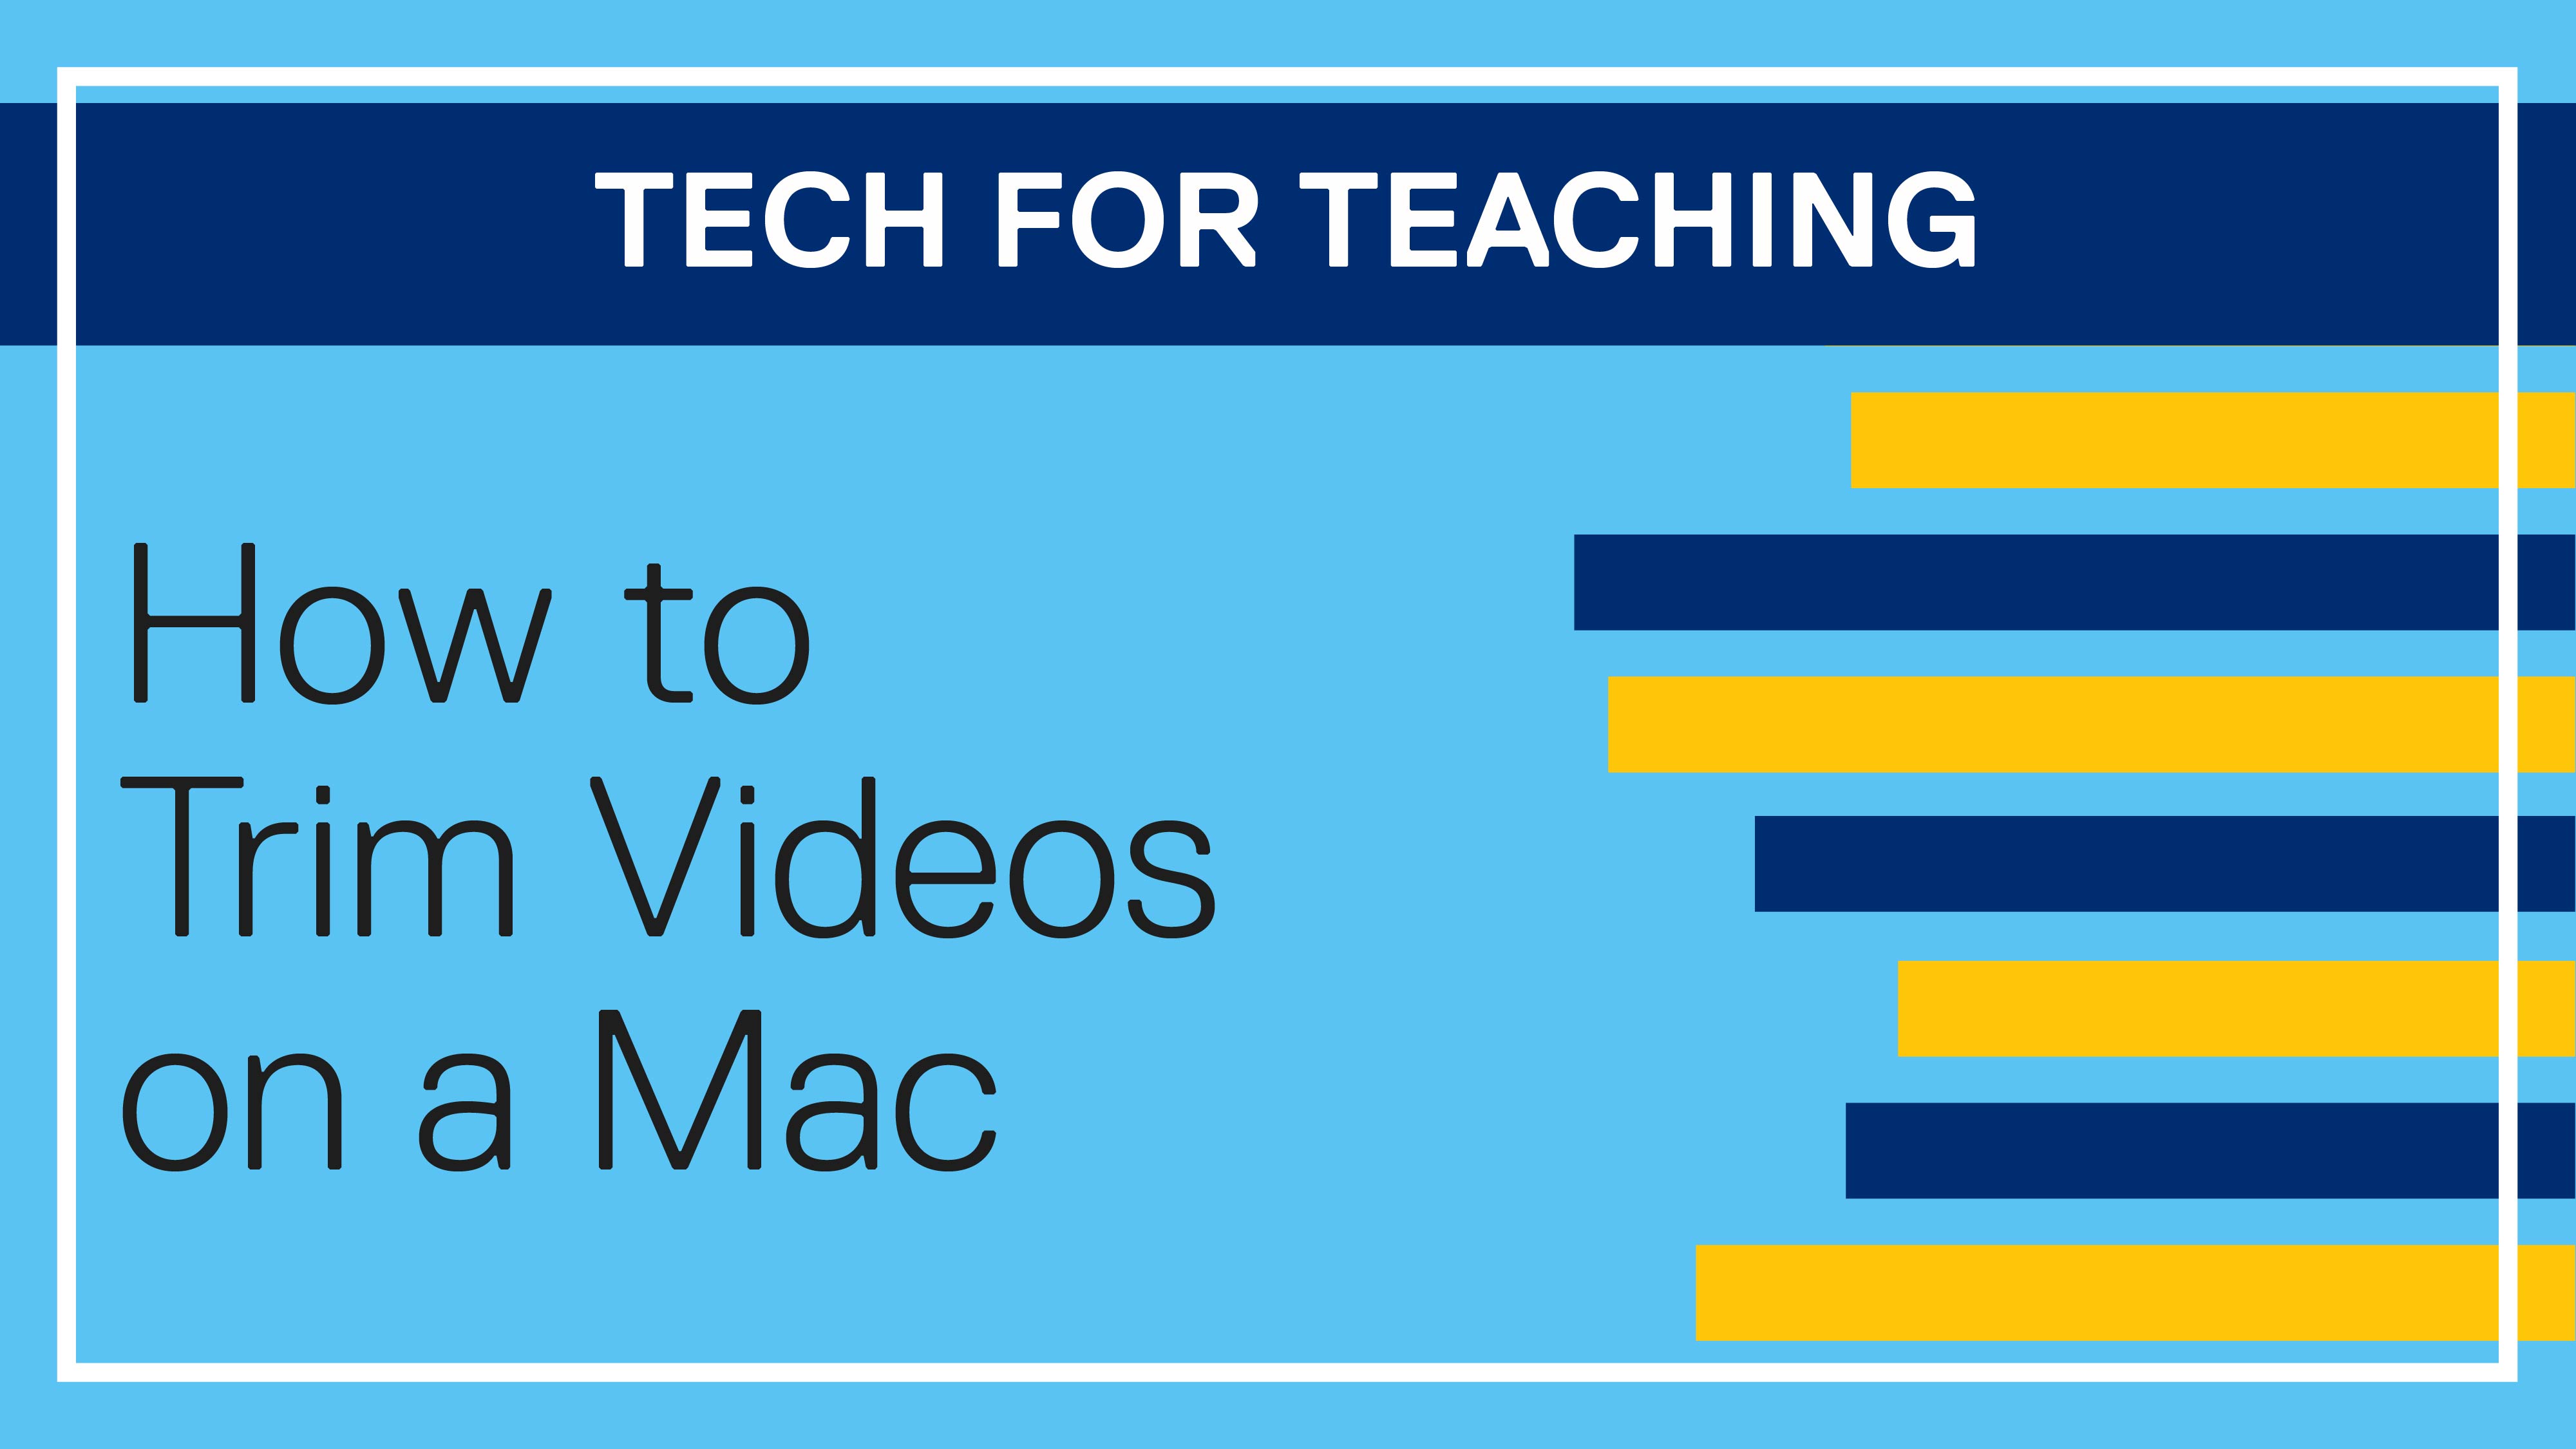 Tech for Teaching: How to Trim Videos on a Mac (1:14)